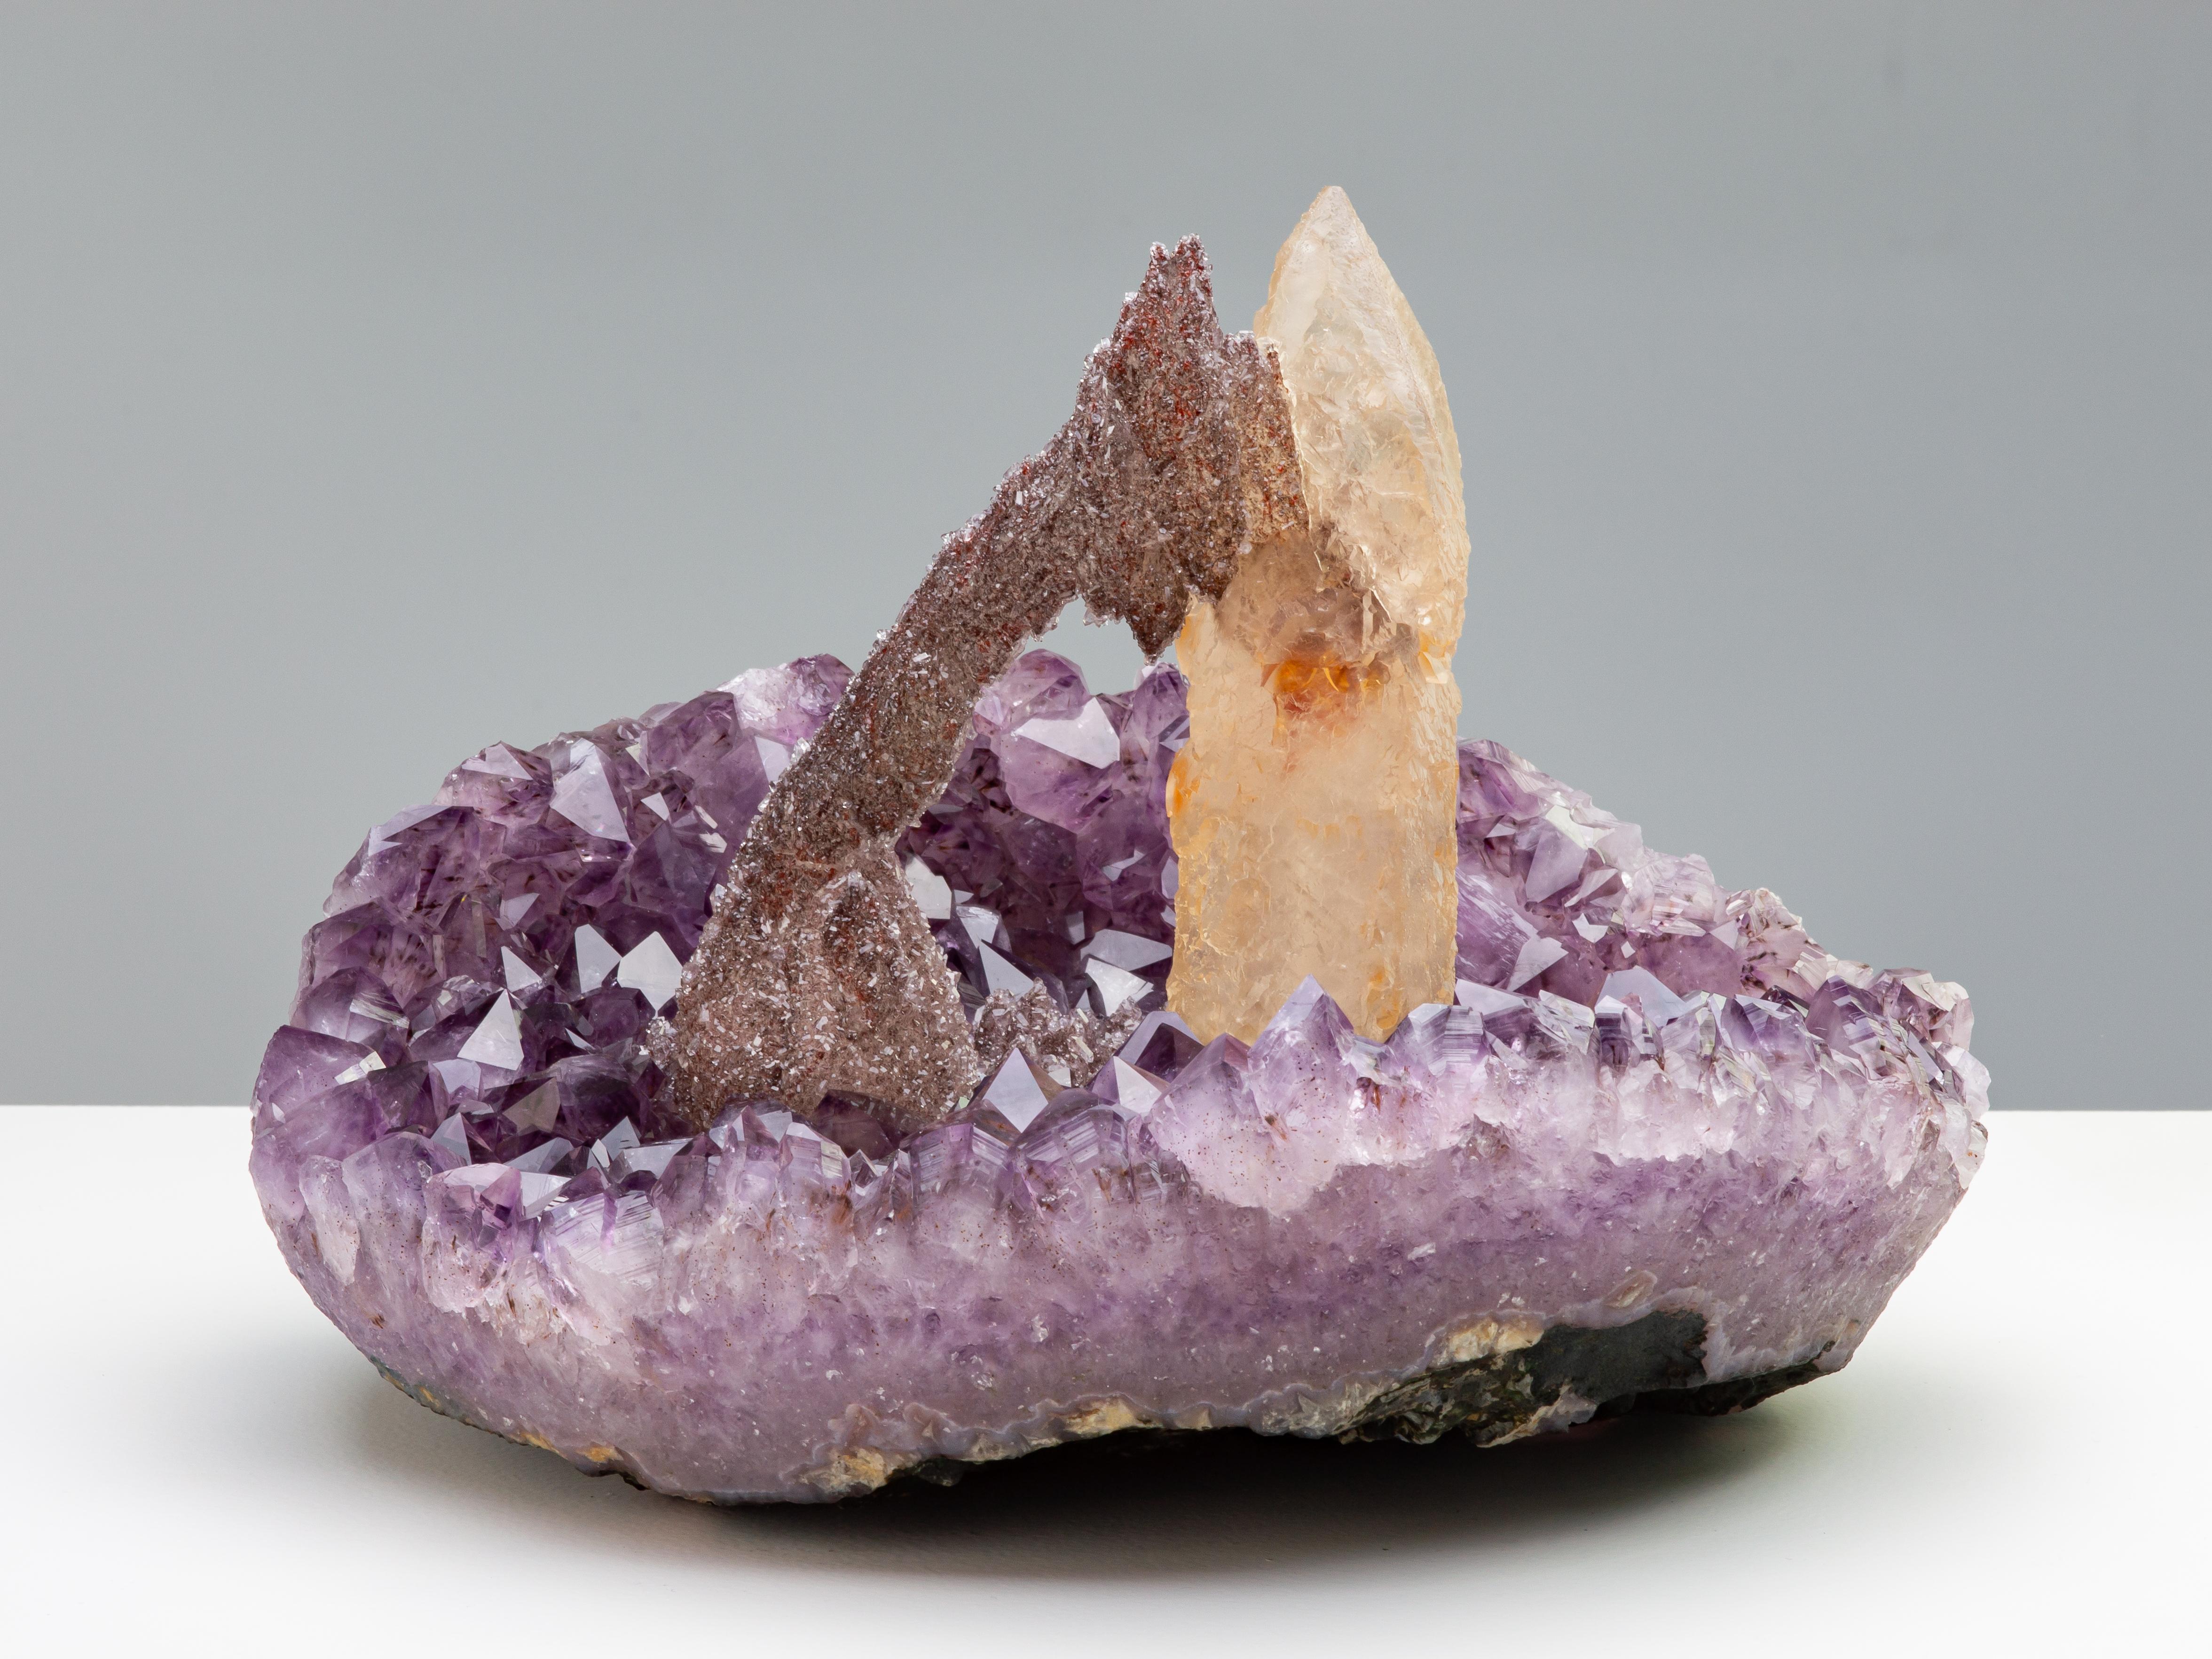 An incredible amethyst formation with central calcite 